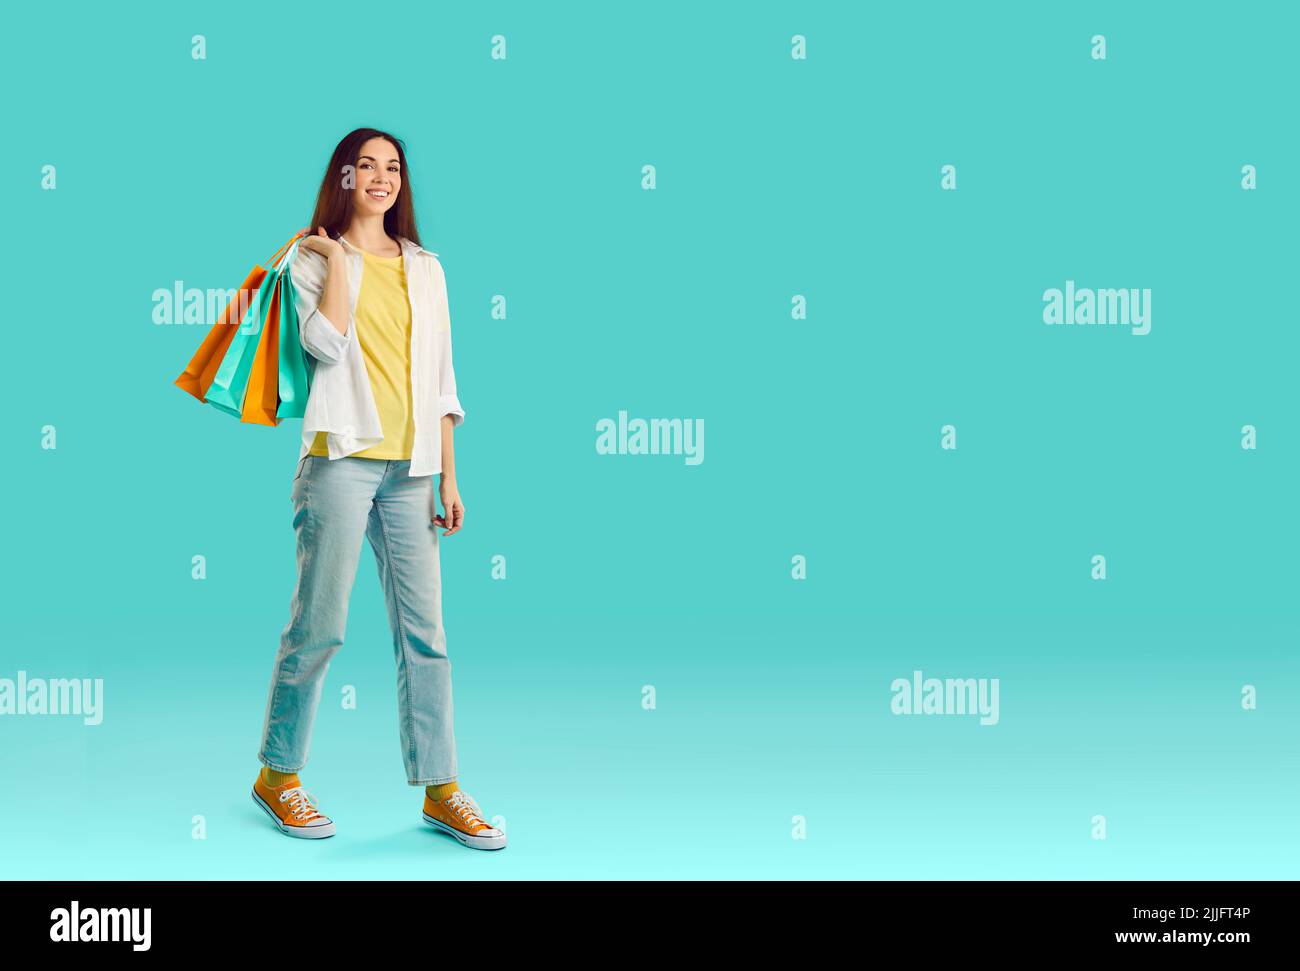 Happy young woman with shopping bags standing on turquoise copy space studio background Stock Photo